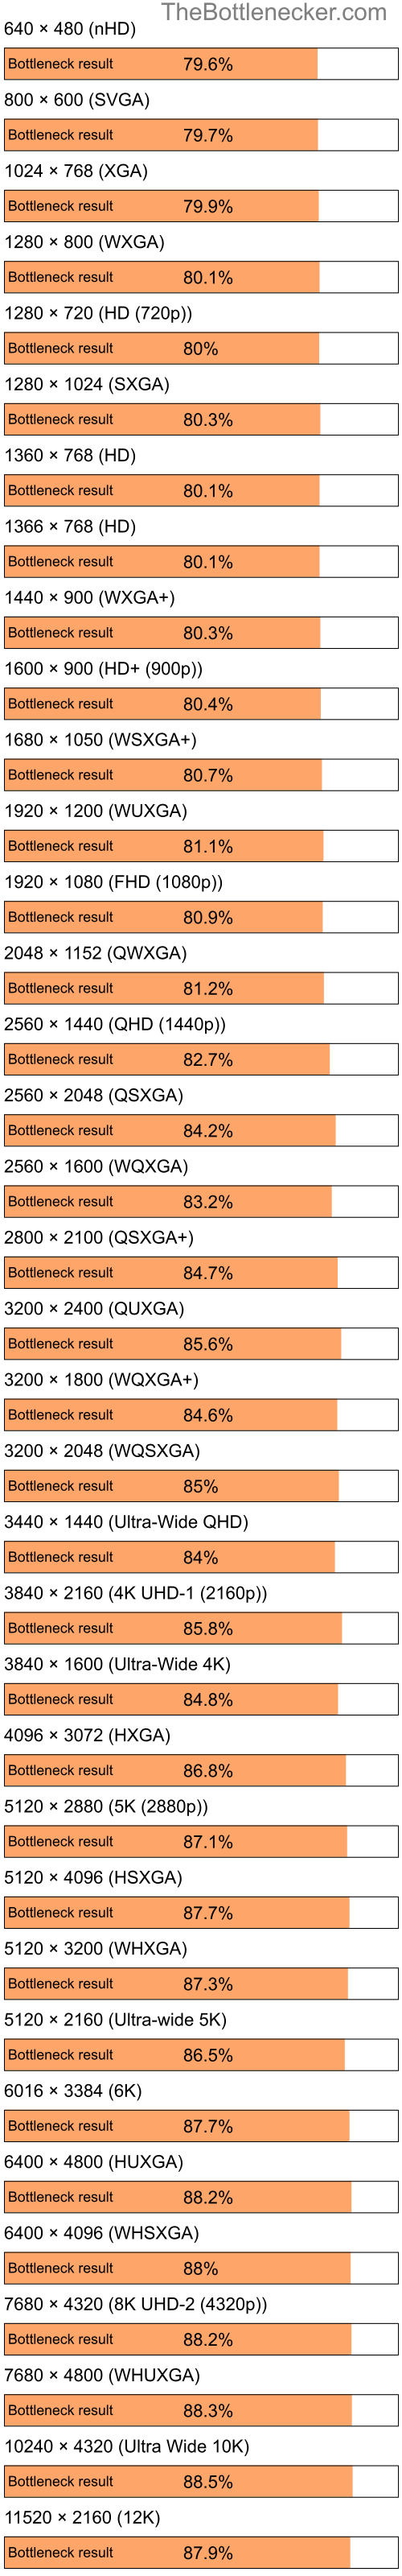 Bottleneck results by resolution for Intel Celeron and AMD Radeon 9600 Family in General Tasks